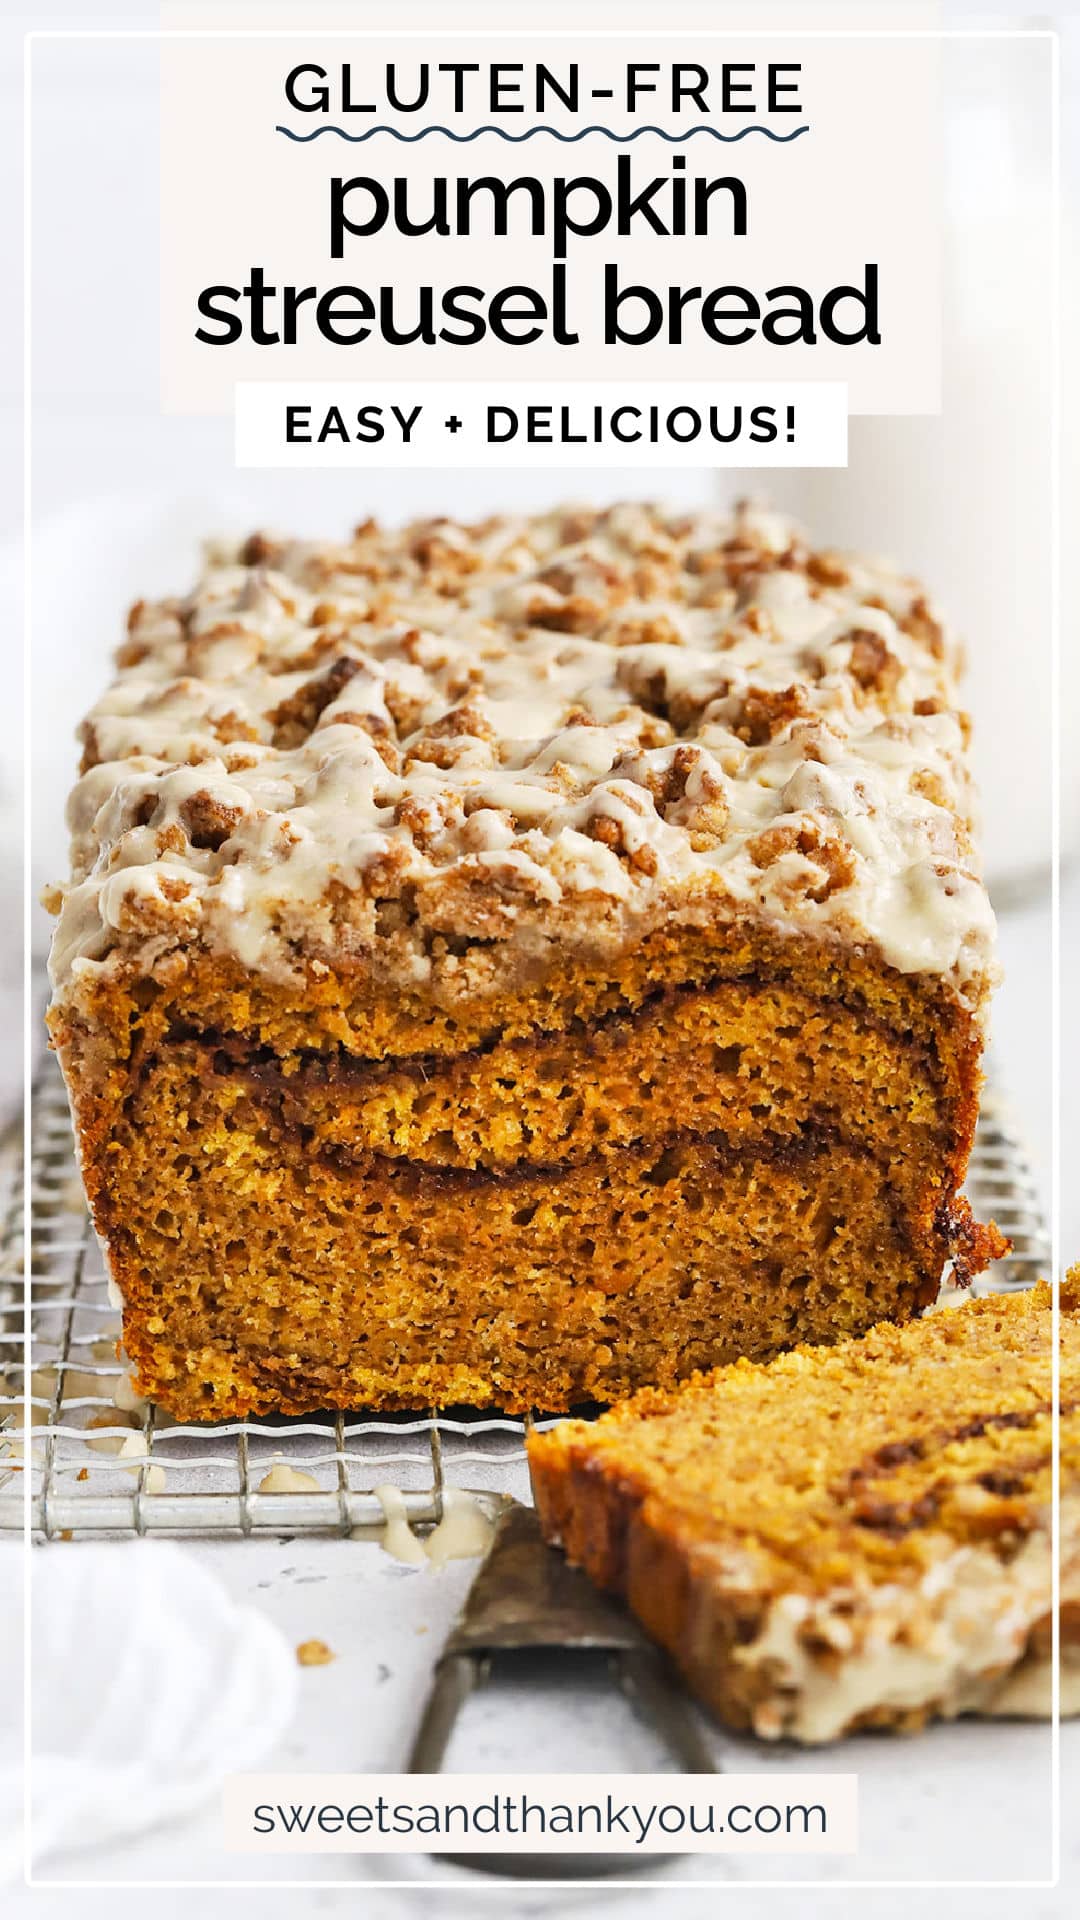 Gluten-Free Pumpkin Streusel Bread With Maple Glaze - This amazing gluten-free cinnamon swirl pumpkin bread is topped with a buttery crumble and sweet maple glaze. It's THE BEST gluten-free pumpkin bread recipe ever! // Cinnamon Swirl Pumpkin Bread Recipe // Maple Pumpkin Bread // Maple Glaze Pumpkin Bread // Glazed Pumpkin Bread // Gluten-Free Quick Bread //